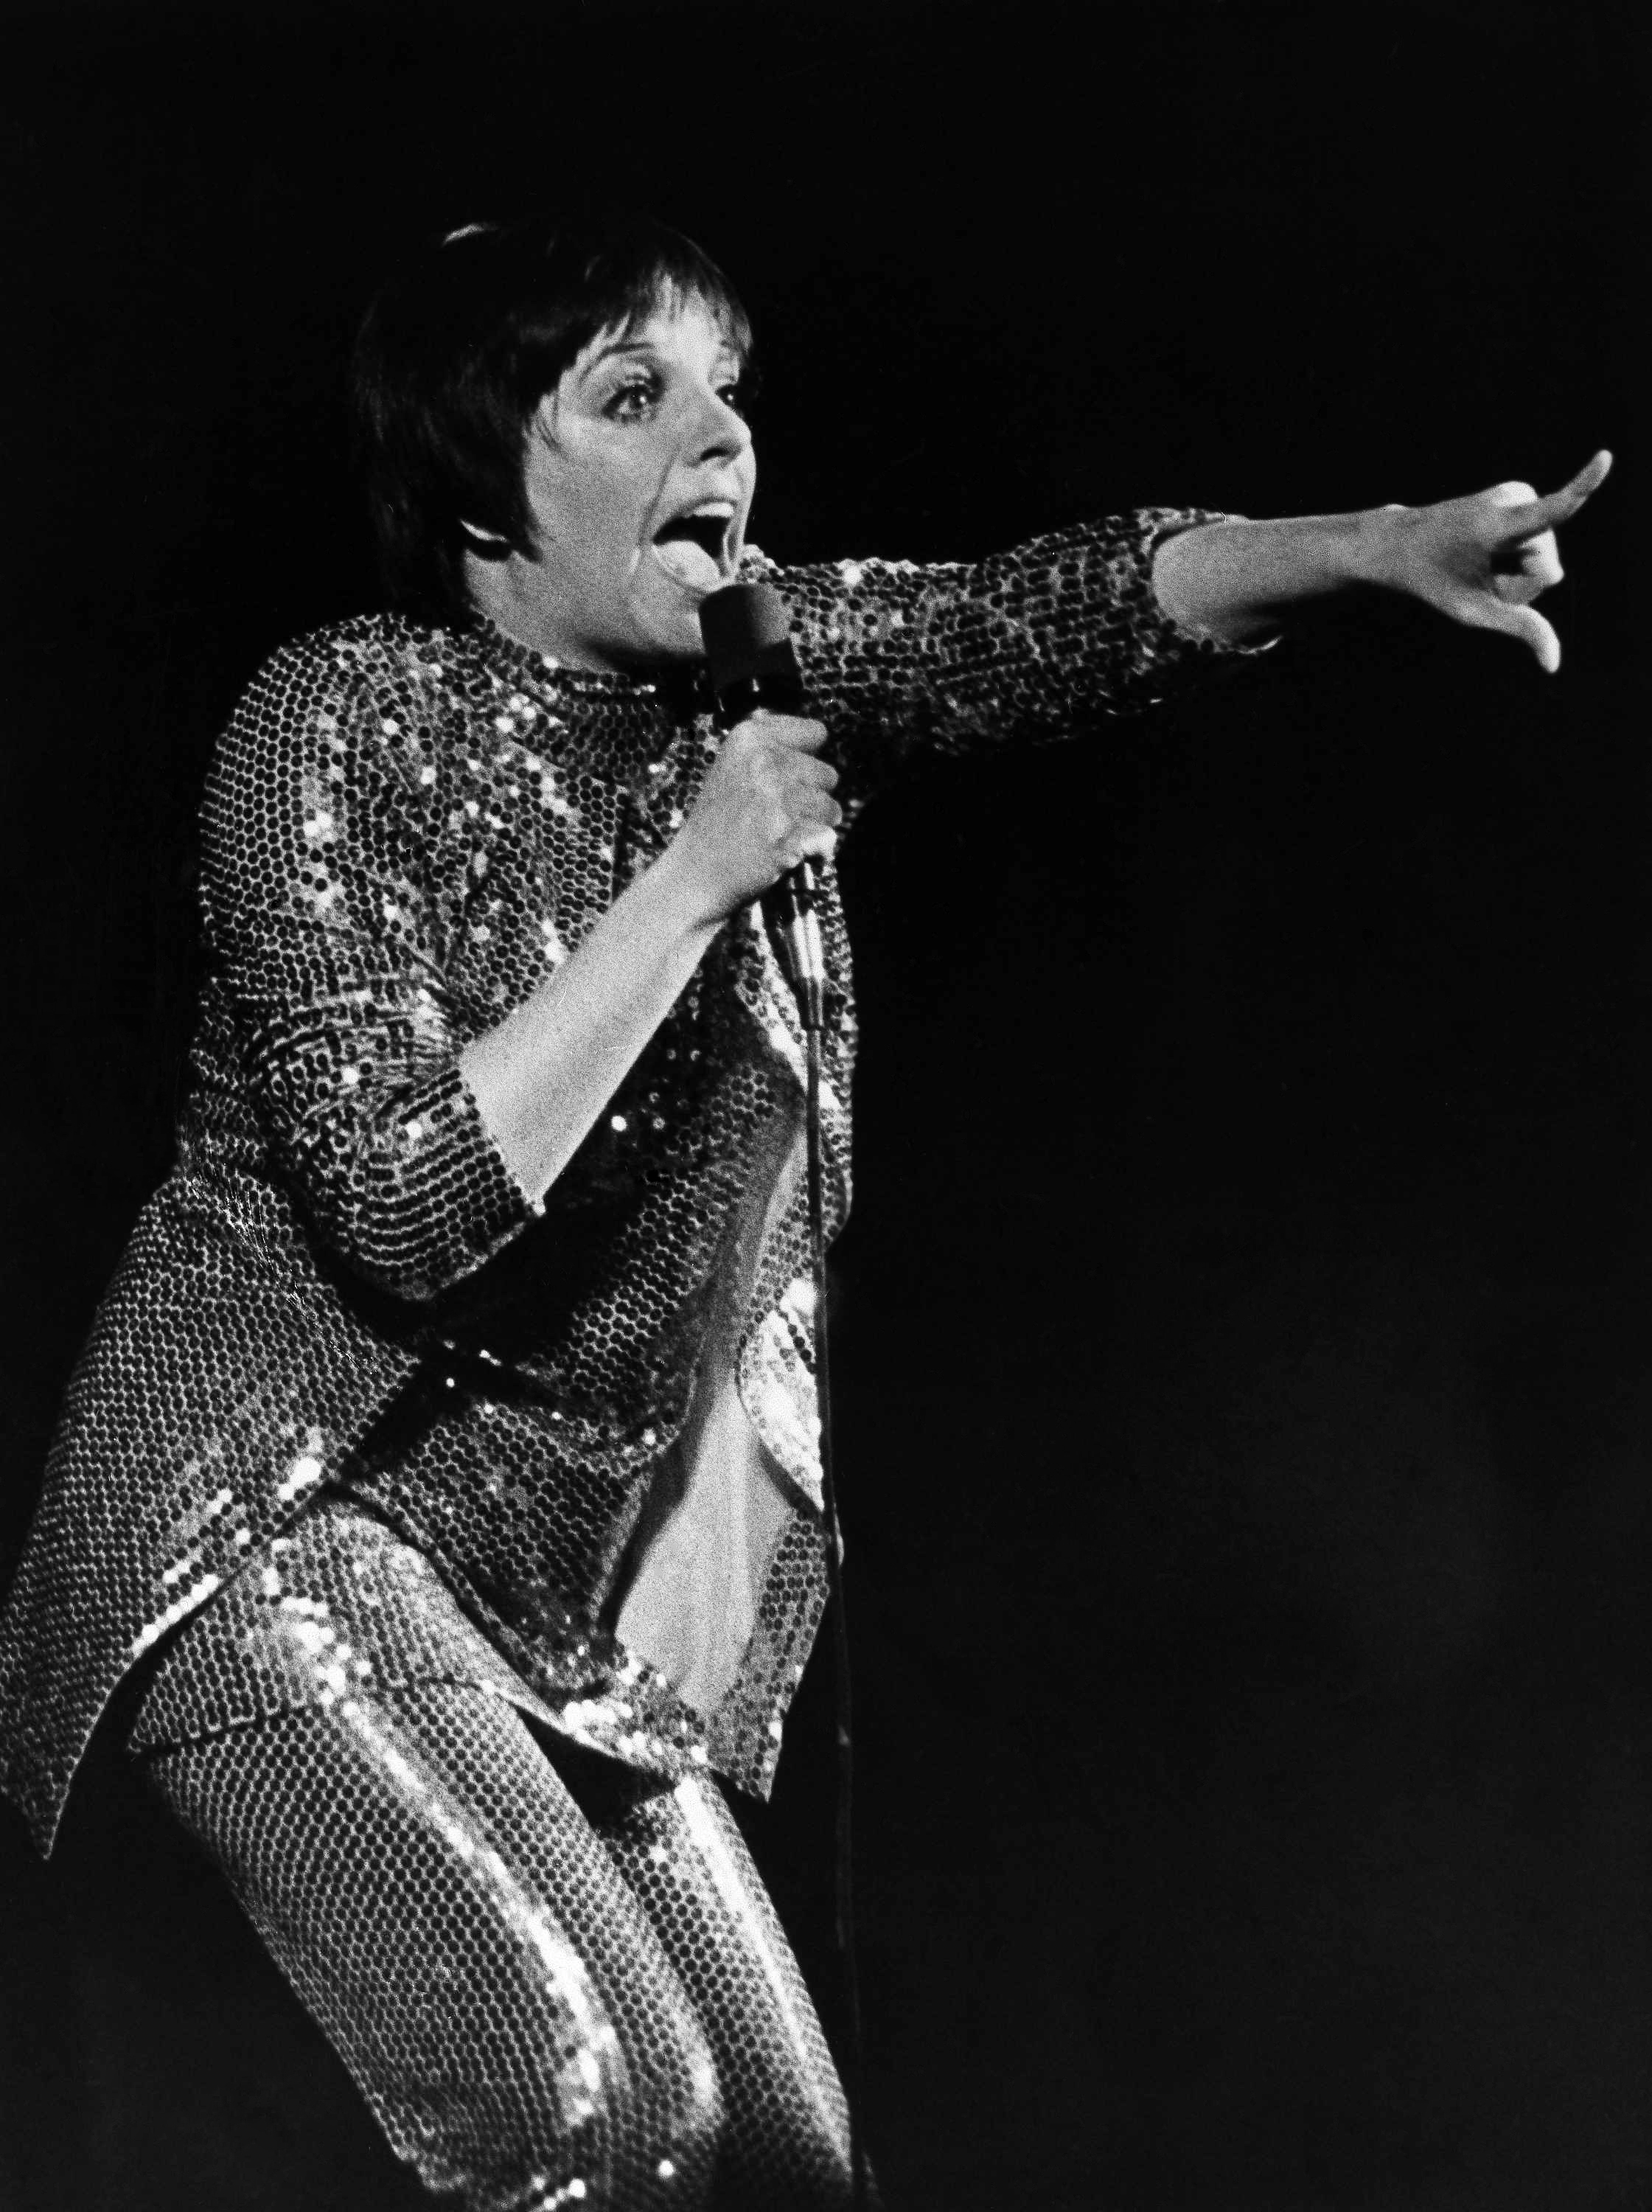 A black and white photo of Liza Minelli in a sequinned outfit performing on stage in 1975.